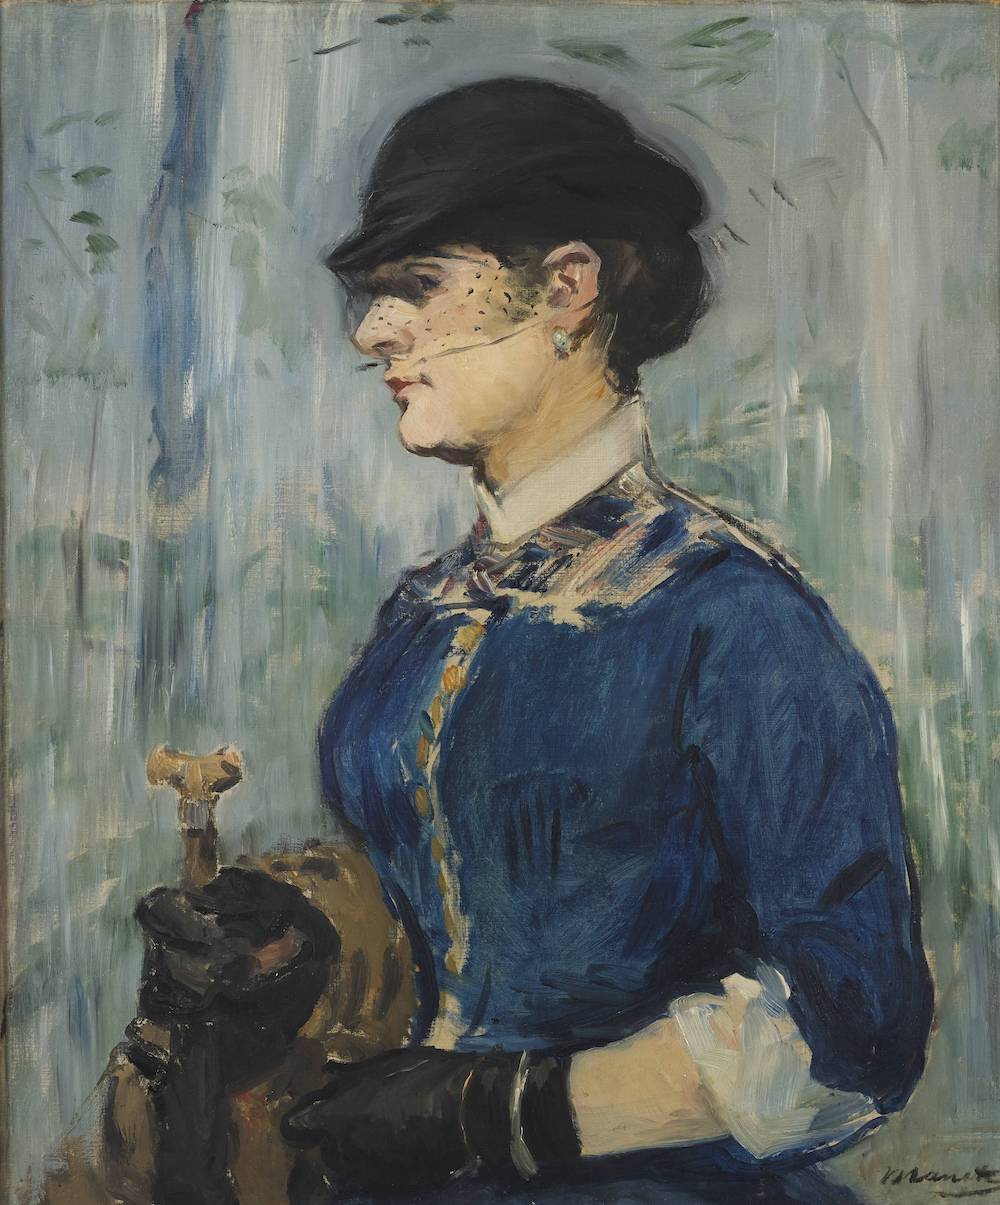 Édouard Manet, Young Woman in a Round Hat, c. 1877–79, oil on canvas, the Henry and Rose Pearlman Foundation, on loan to the Princeton University Art Museum.